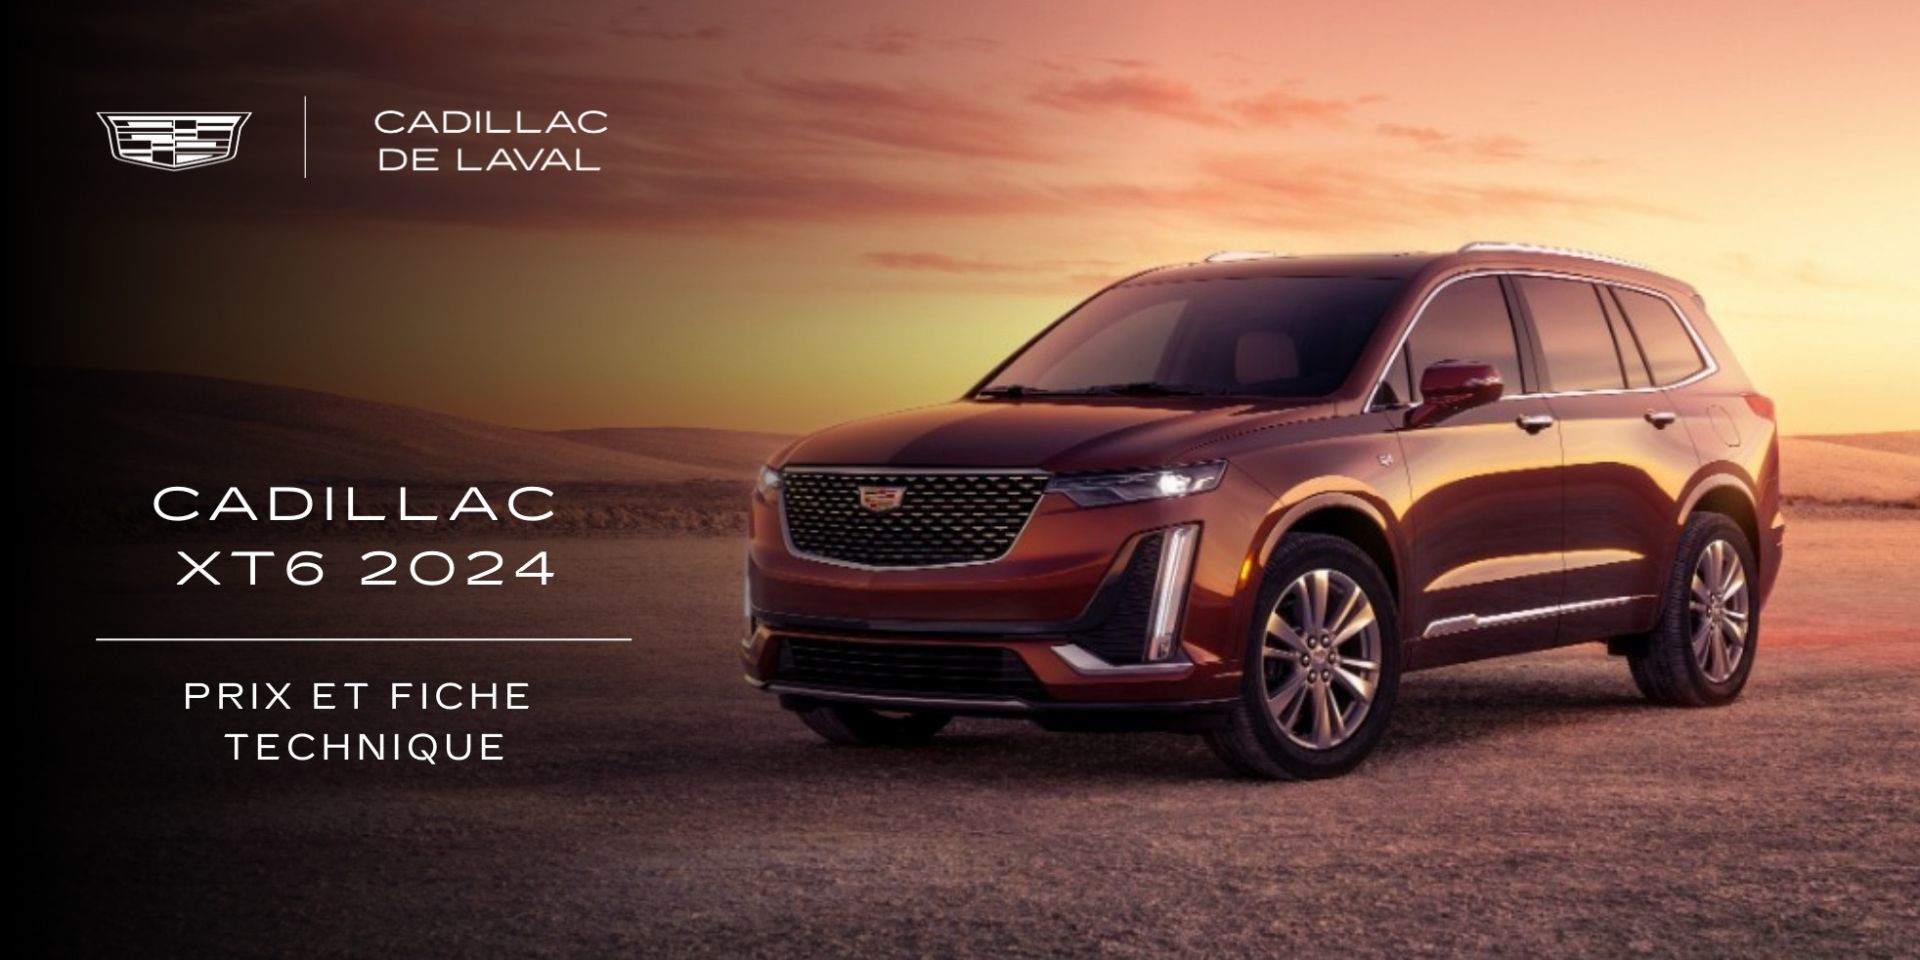 2024 Cadillac XT6 Price and Specs Cadillac Laval